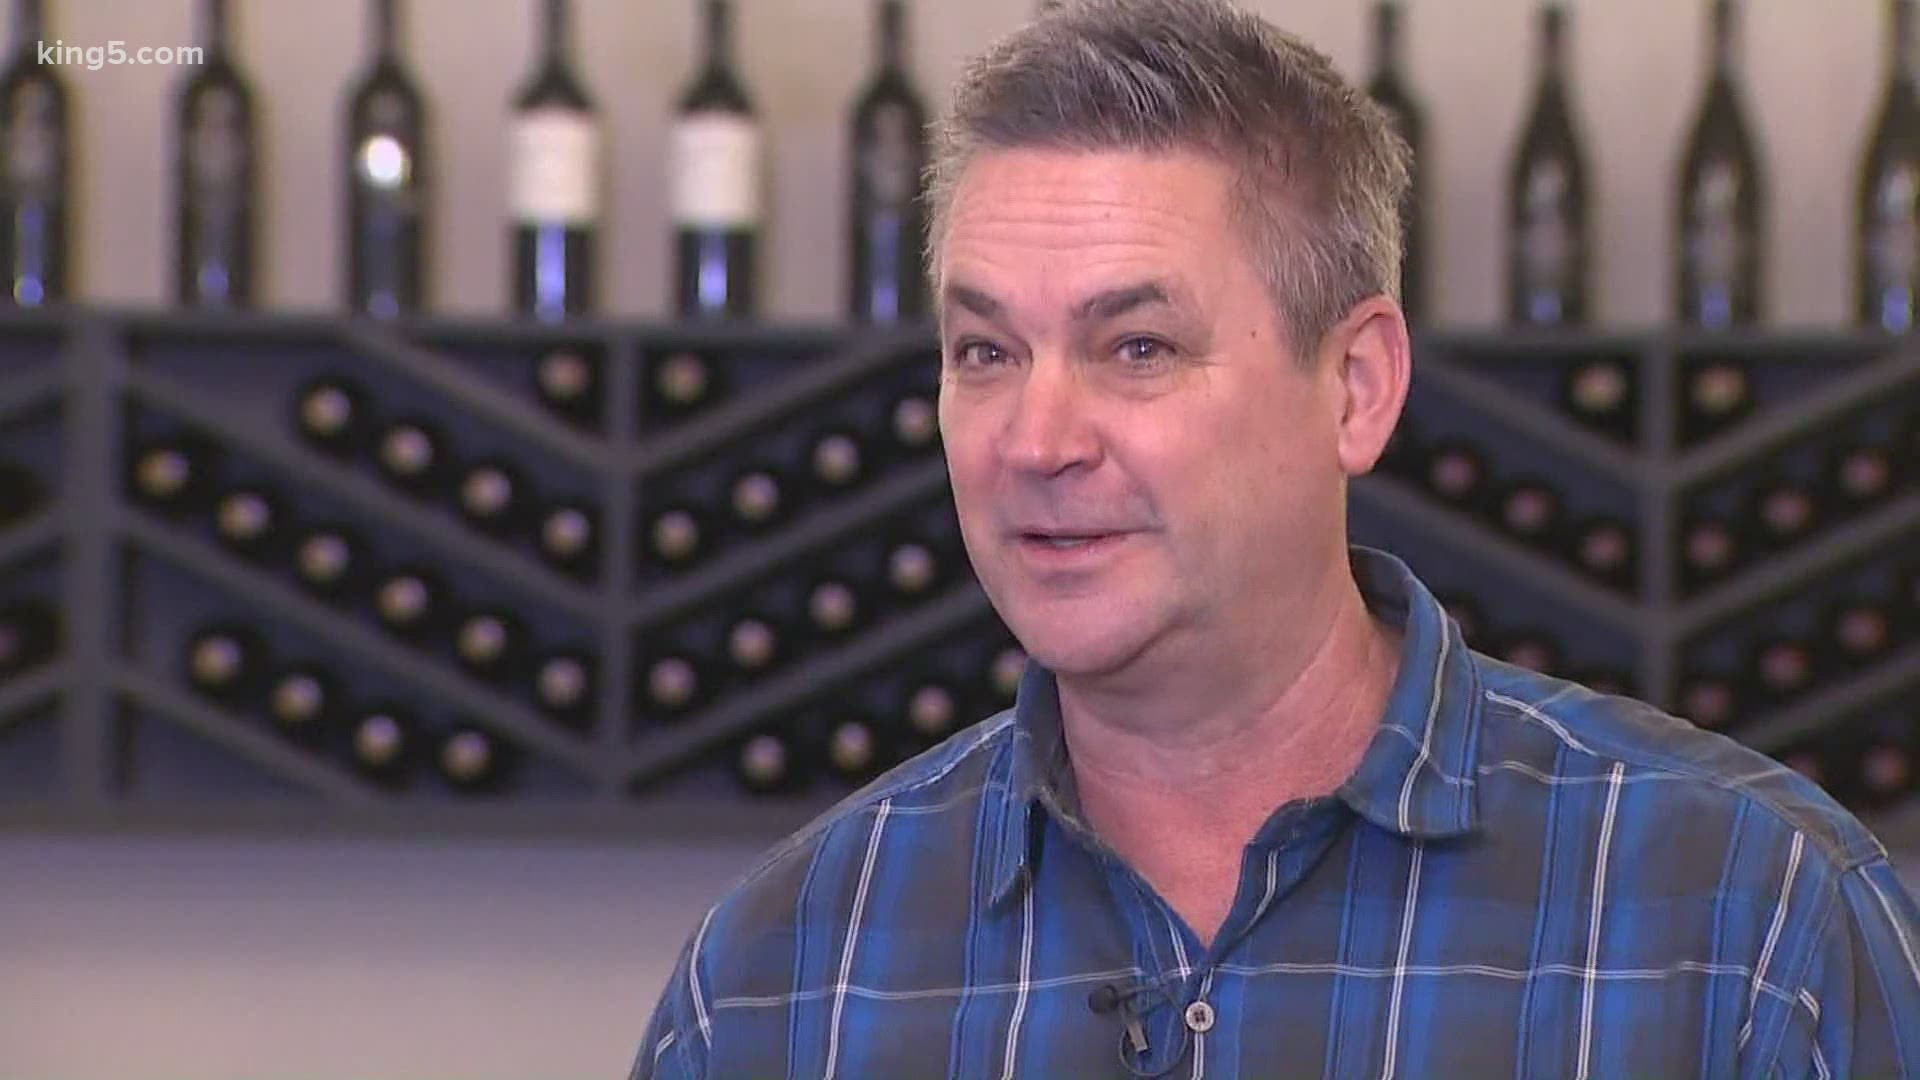 Wineries have had to make some major changes to survive since the industry relies on three main avenues for sales: restaurants, grocery stores and online sales.